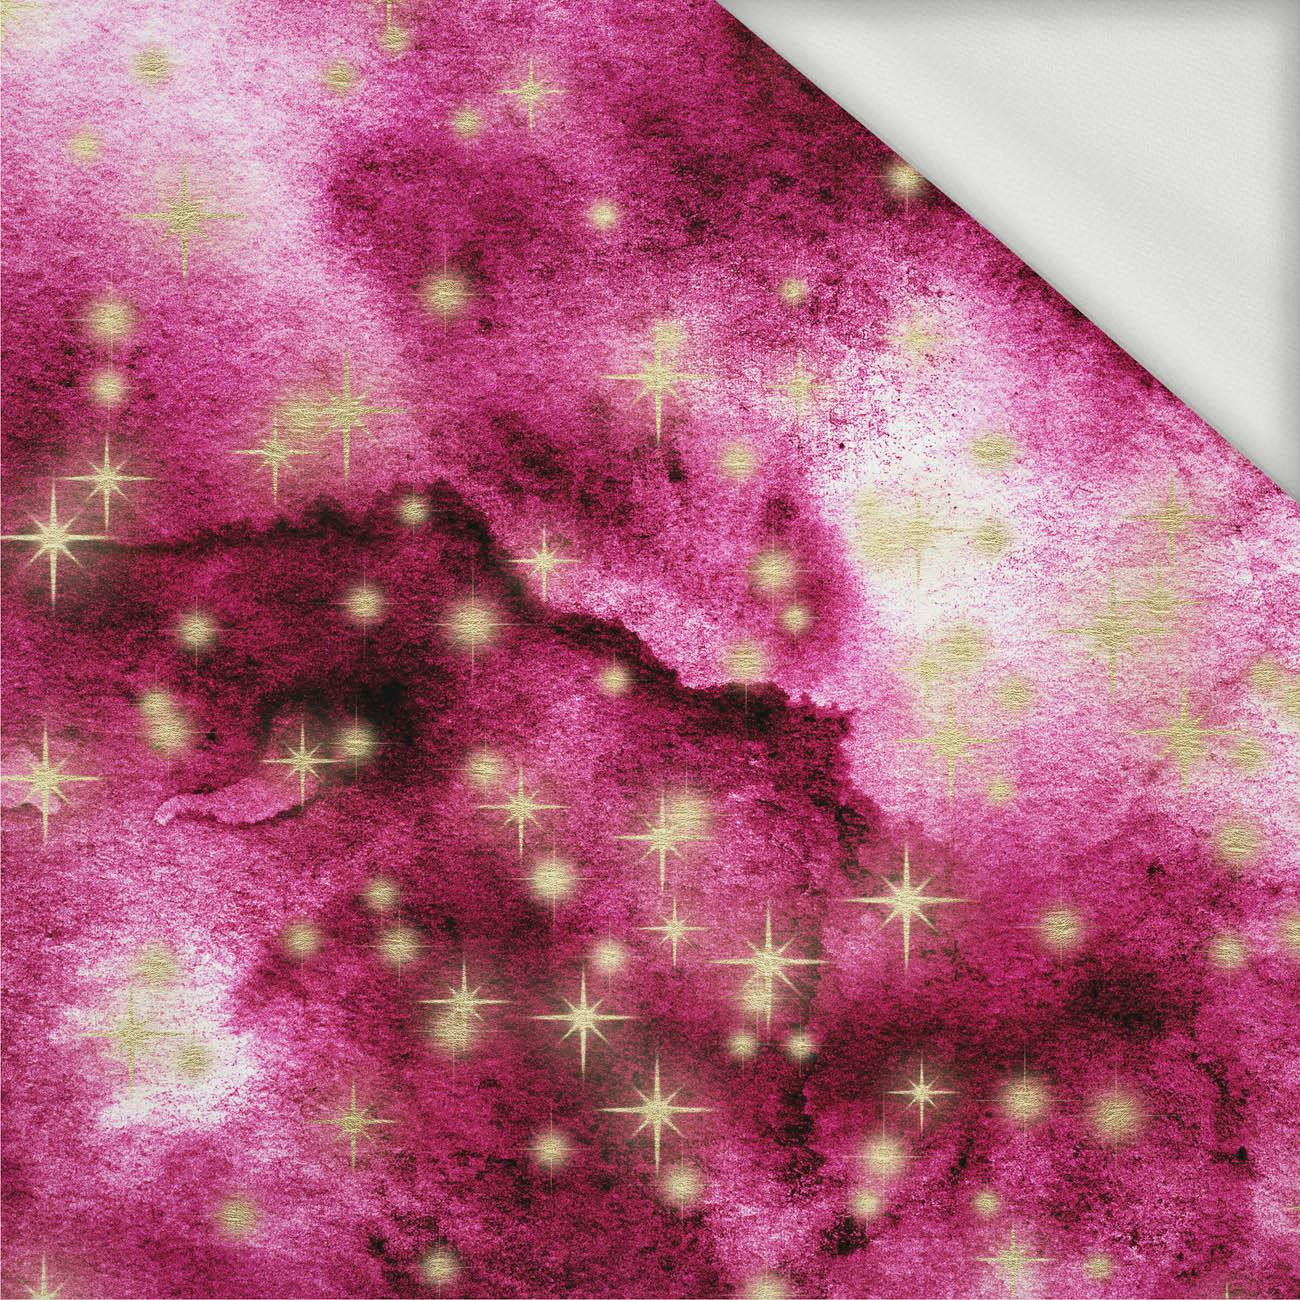 GOLDEN STARS Pat. 2 / WATERCOLOR MARBLE - looped knit fabric